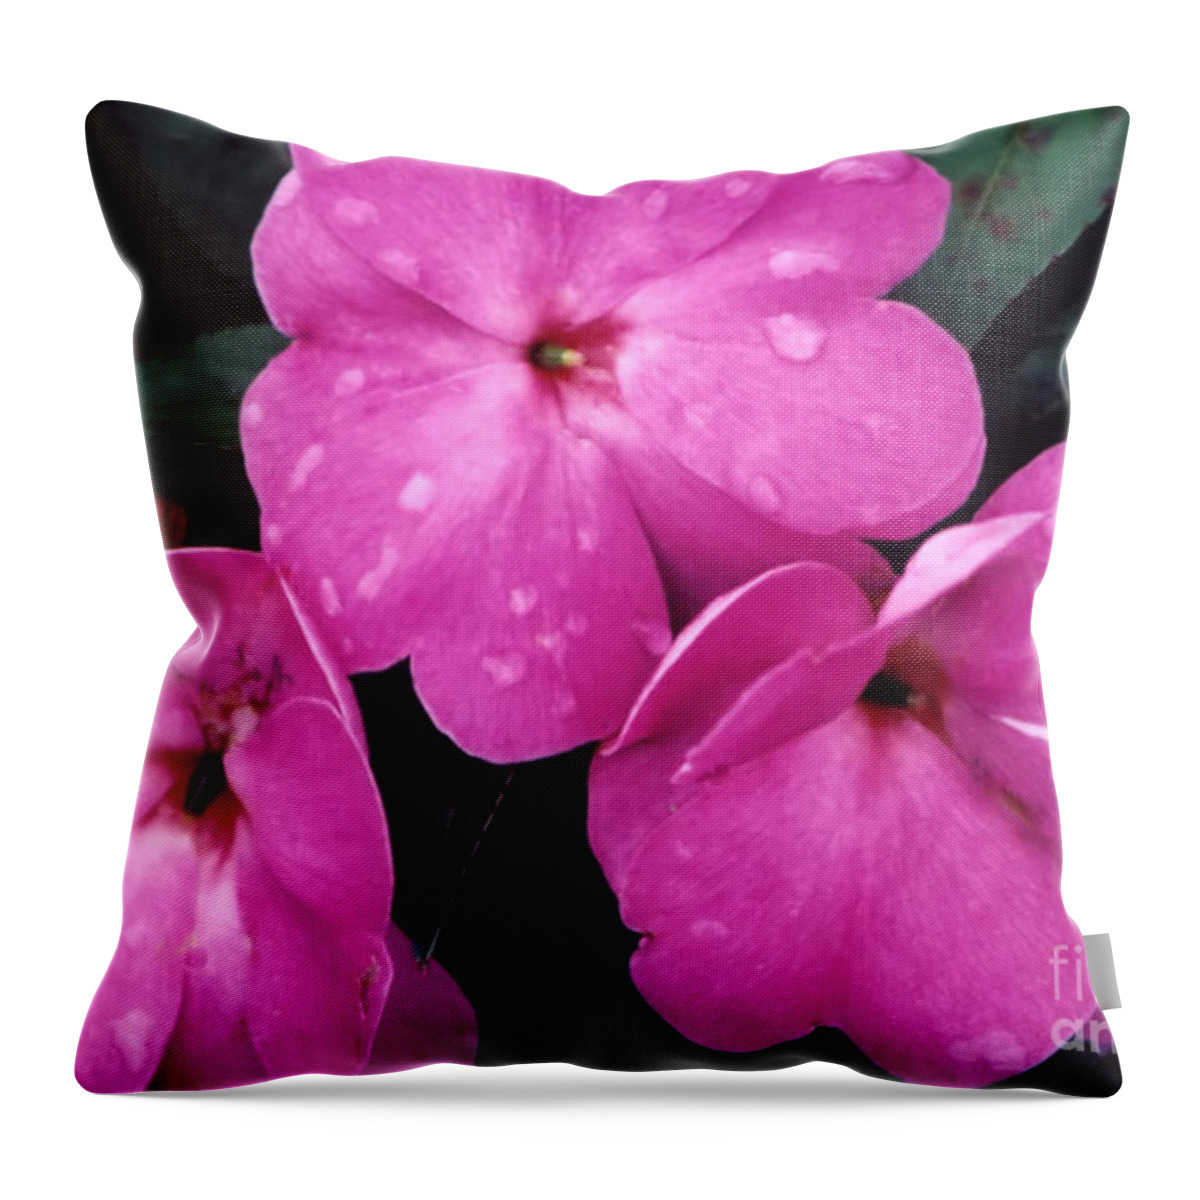 Nature Flower Inpatiens Walleriana Busy Lizzie Balsam Perennial Pink Petals Three Trio Rain Raindrops Moisture Dew Liquid Mist Sprinkle Leaves Green Outdoors Bloom; Throw Pillow featuring the photograph After The Rain by Susan Stevenson